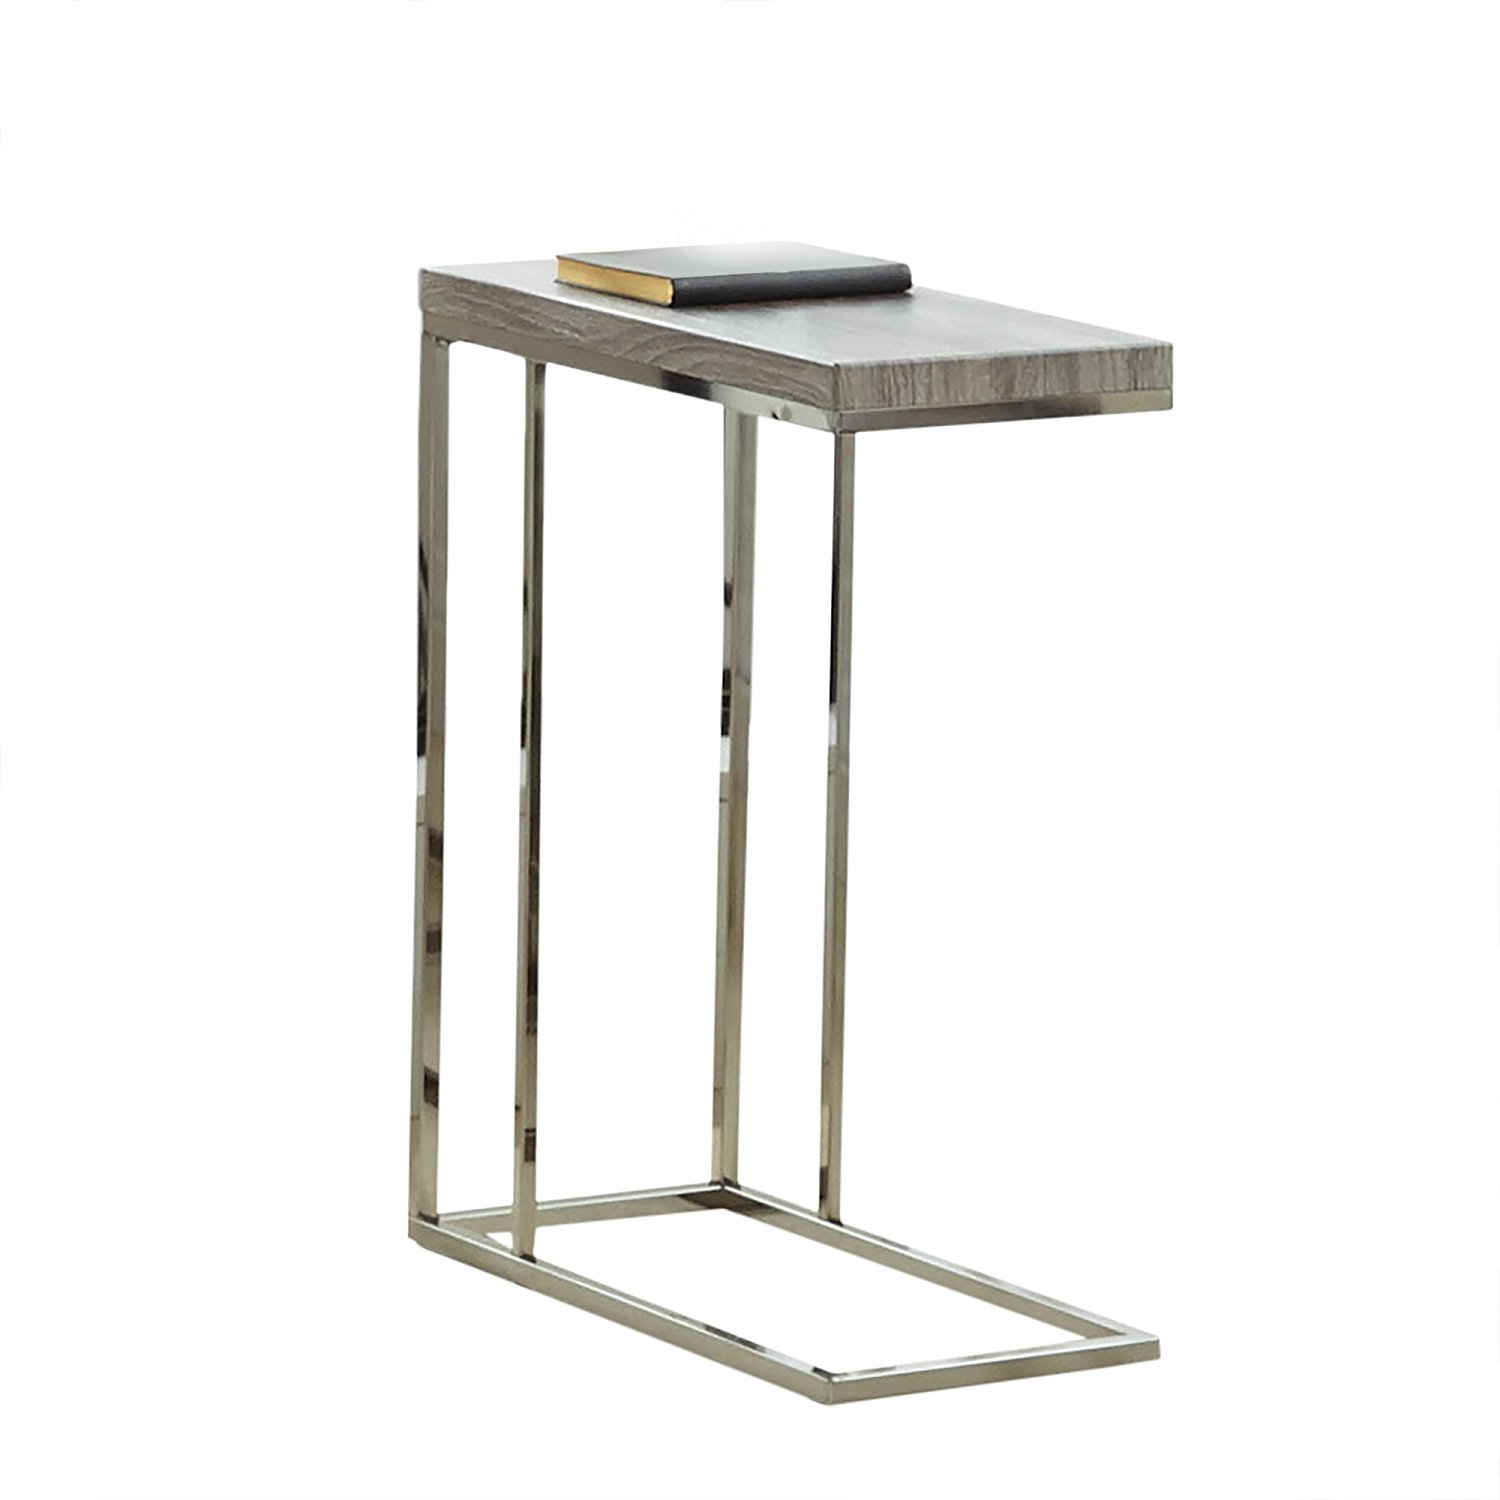 Steve Silver Company Lucia Chairside End Table, 10" x 18" x 25", Grey